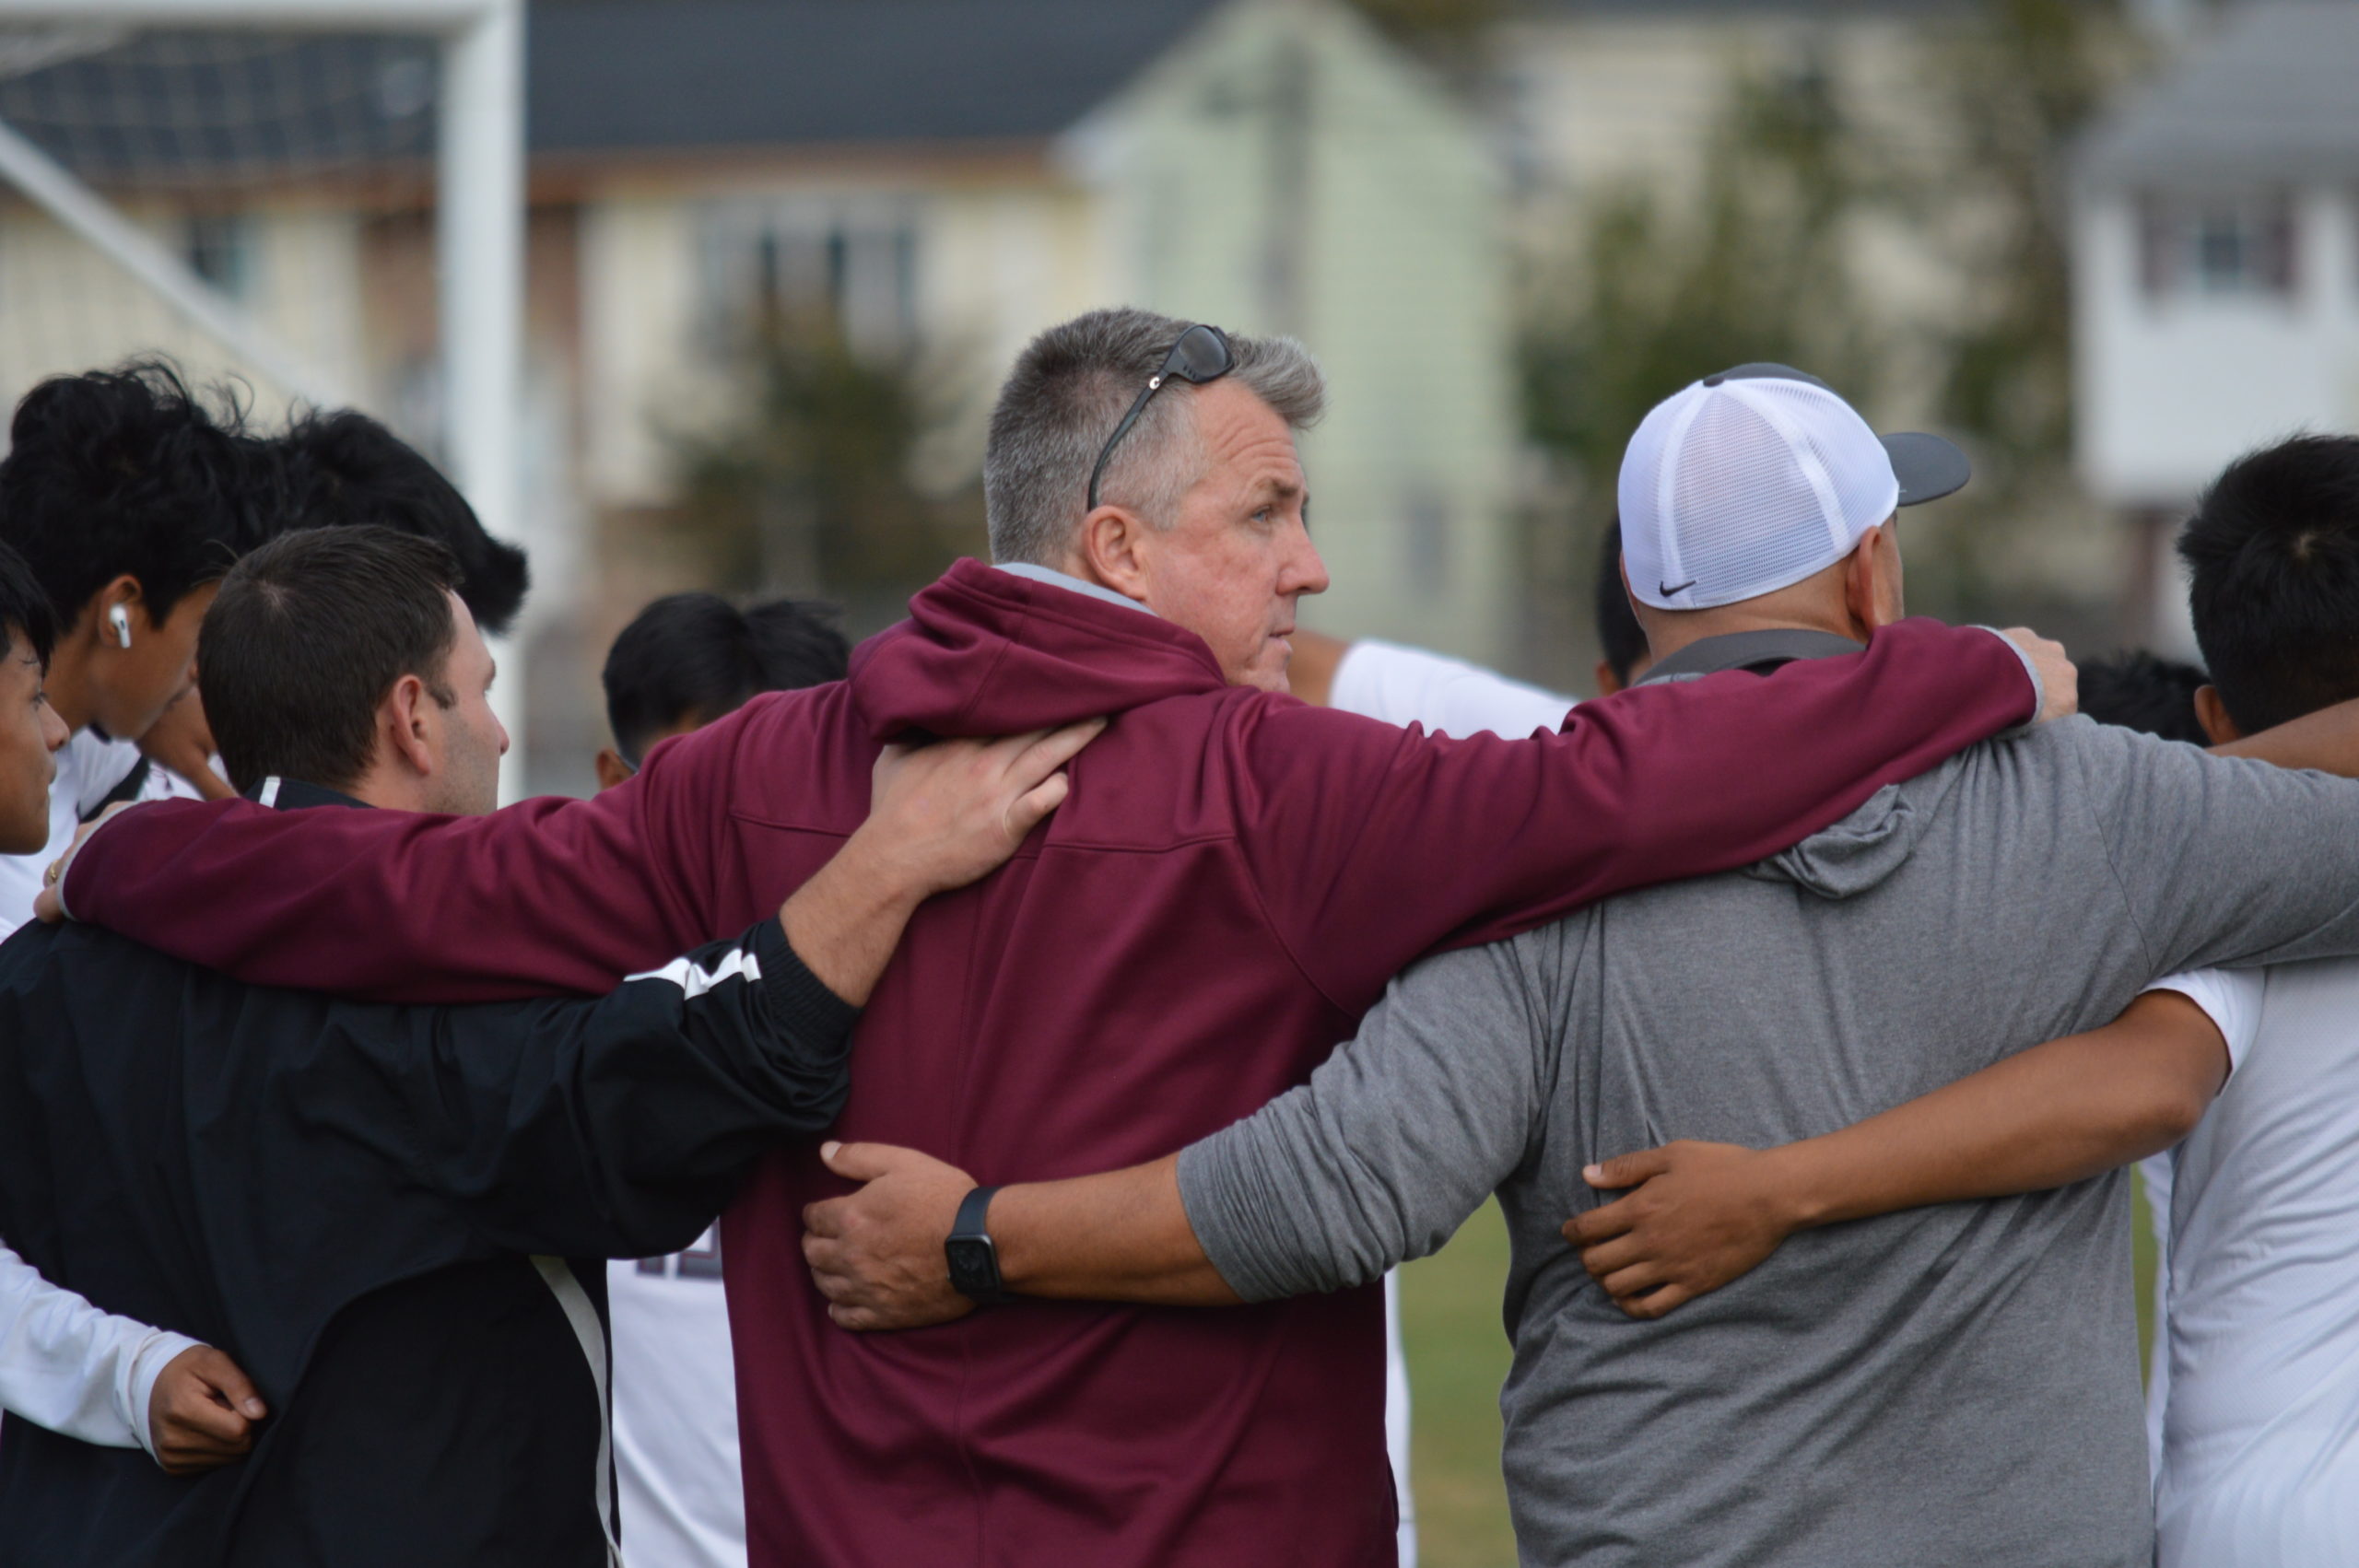 The Bonackers’ pregame huddle was led by head coach Don McGovern prior to Monday’s Suffolk County Class A outbracket game against Wyandanch, which knocked East Hampton from the postseason with a 5-0 victory.